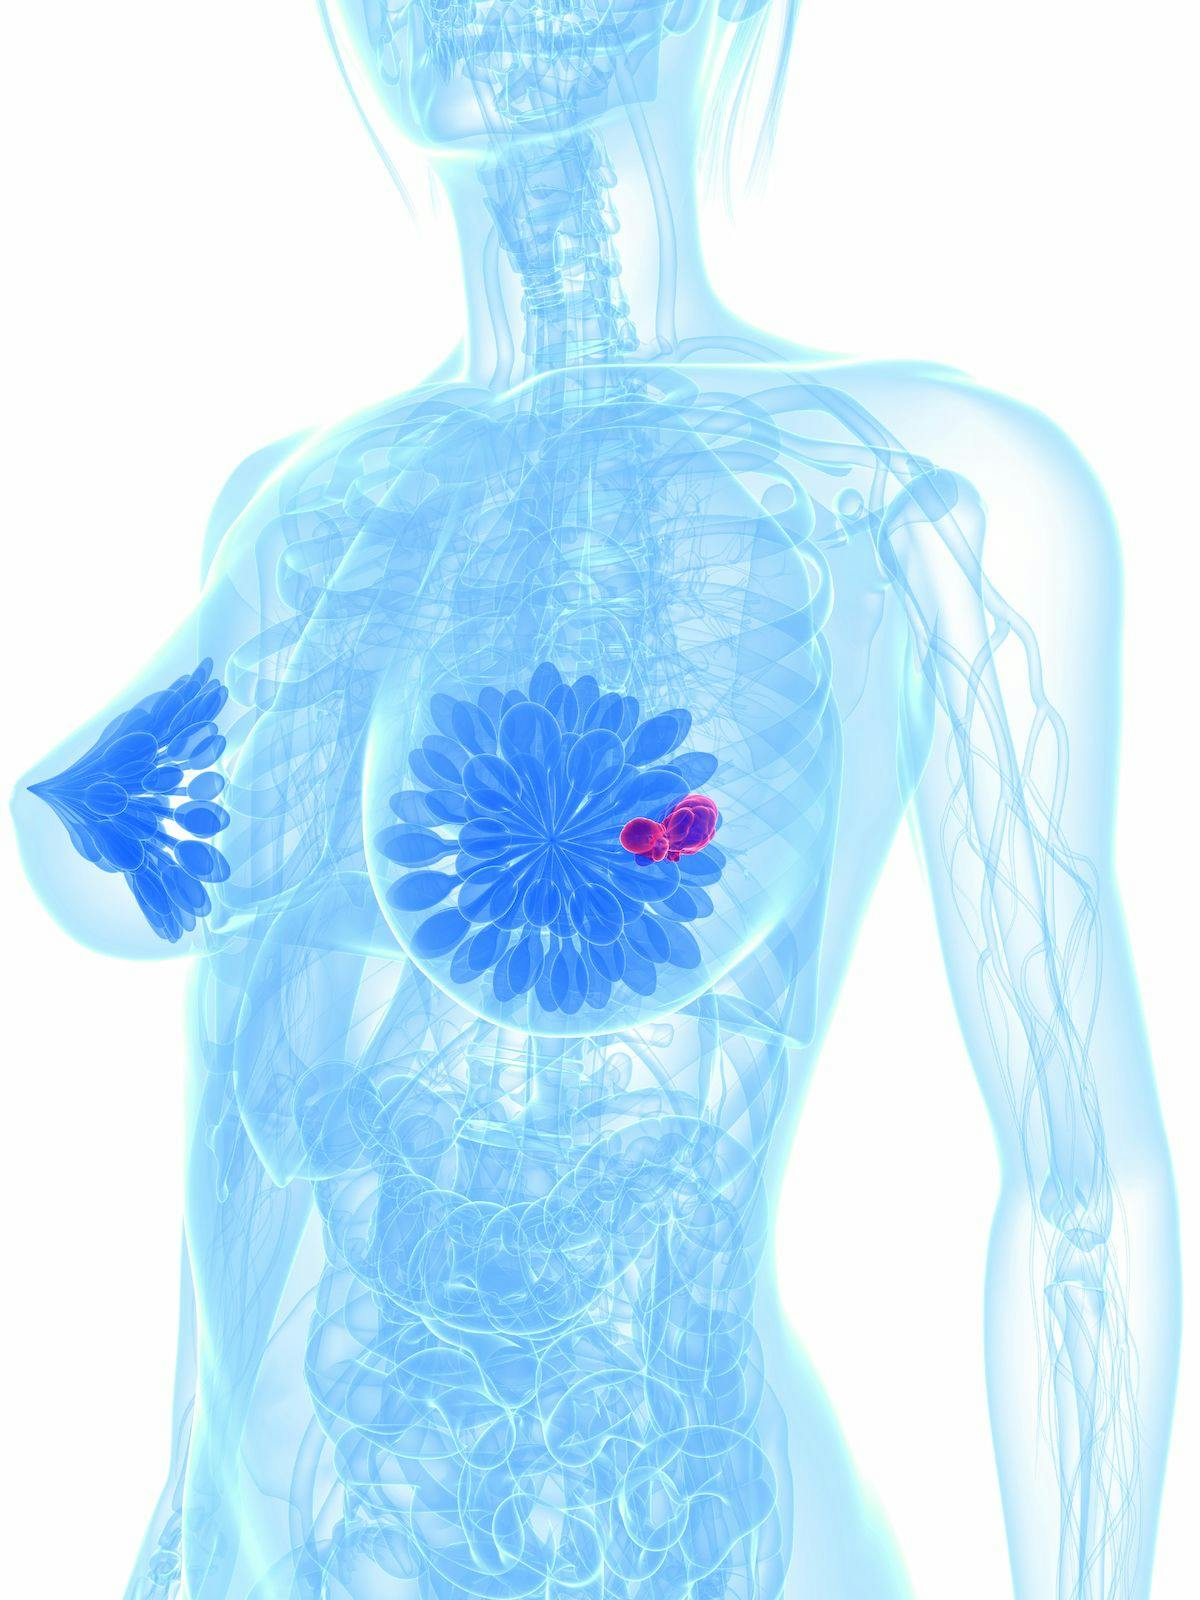 Patients with HER2-positive breast cancer and triple-negative breast cancer may not require breast surgery if a pathological complete response can be identified using image-guided vacuum core biopsy following neoadjuvant systemic therapy.